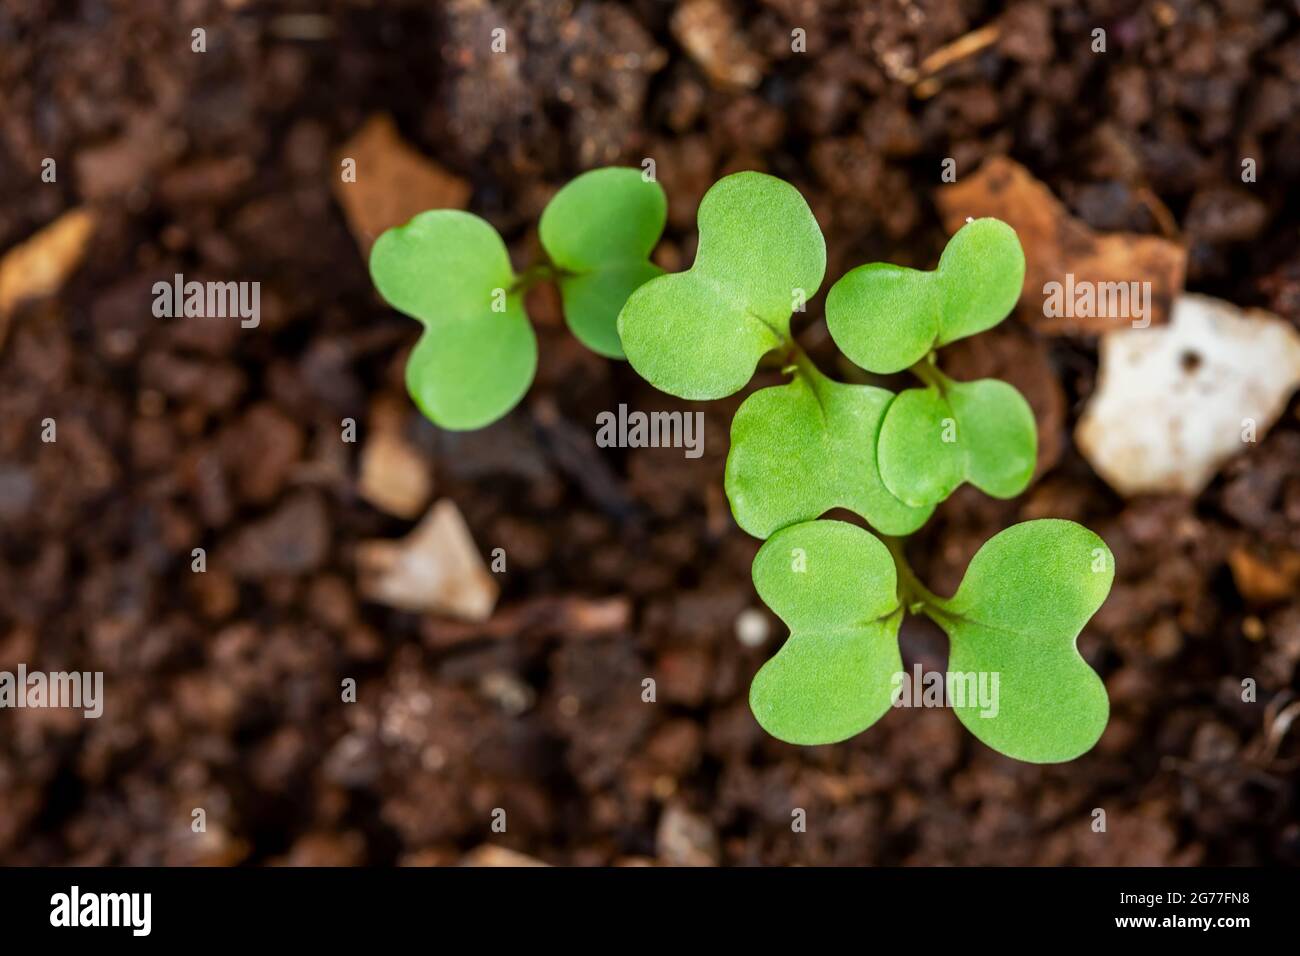 sprout of Brassica rapa (Chinensis Group) growing from soil. Stock Photo